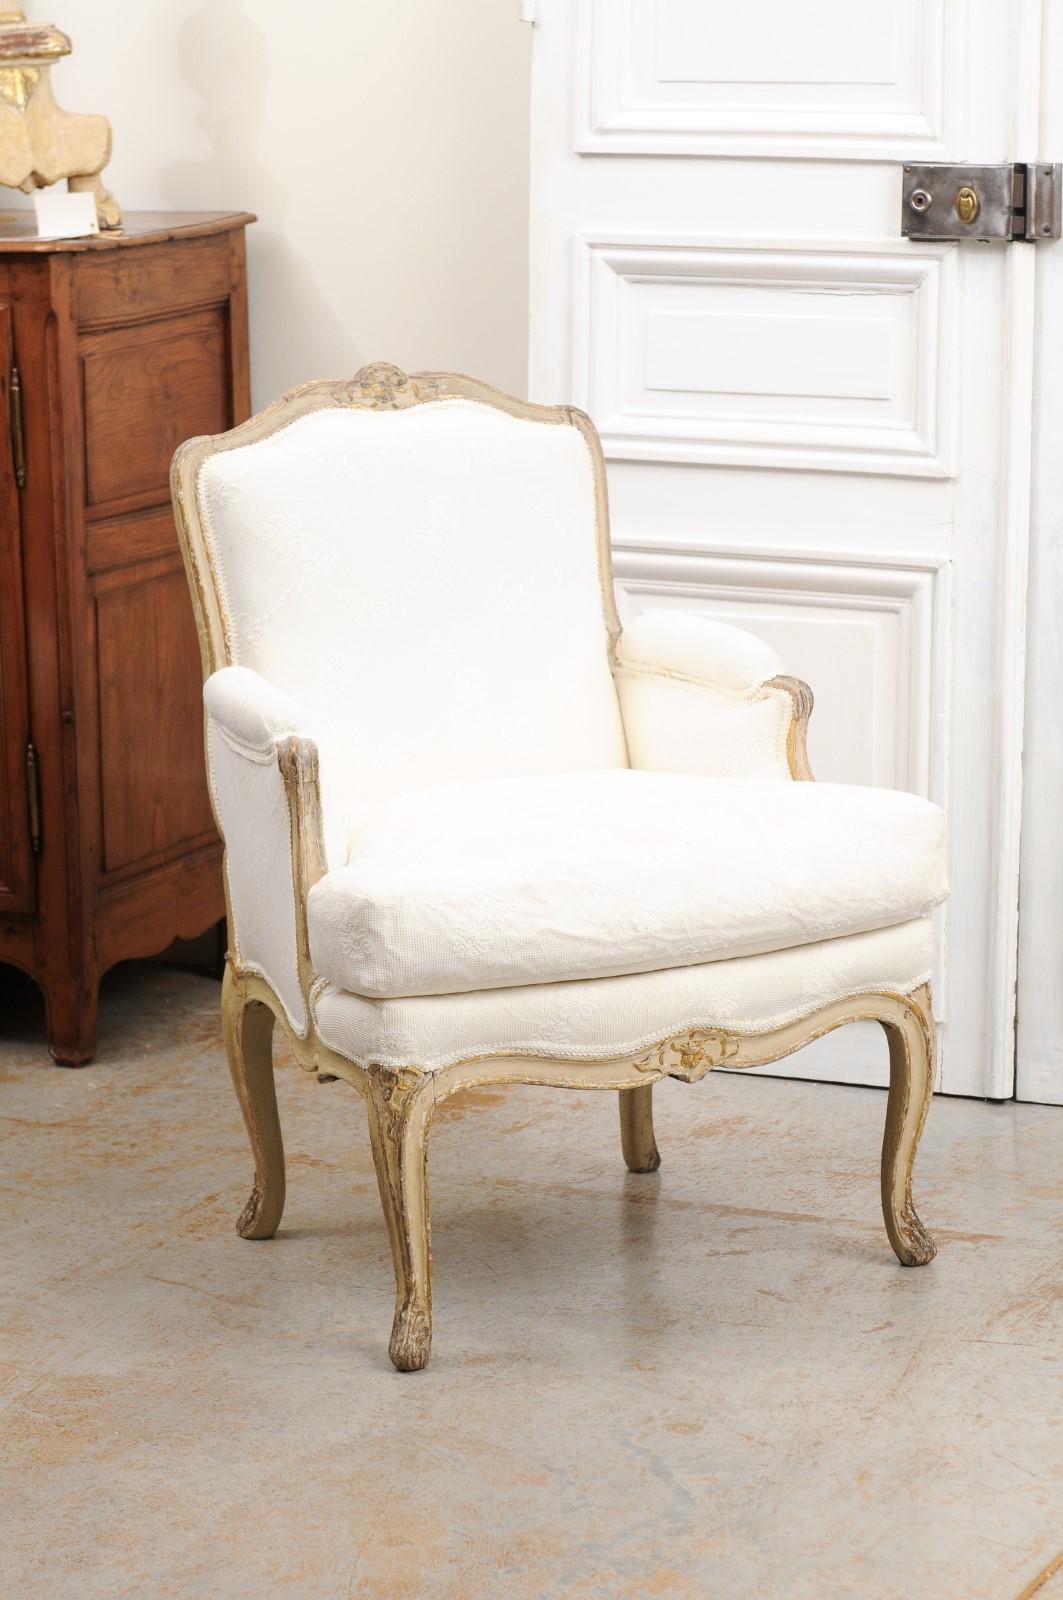 A French Louis XV style painted and carved wooden bergère chair from the late 19th century, with lace fabric and distressed patina. Created in France during the last quarter of the 19th century, this painted bergère features a slightly slanted back